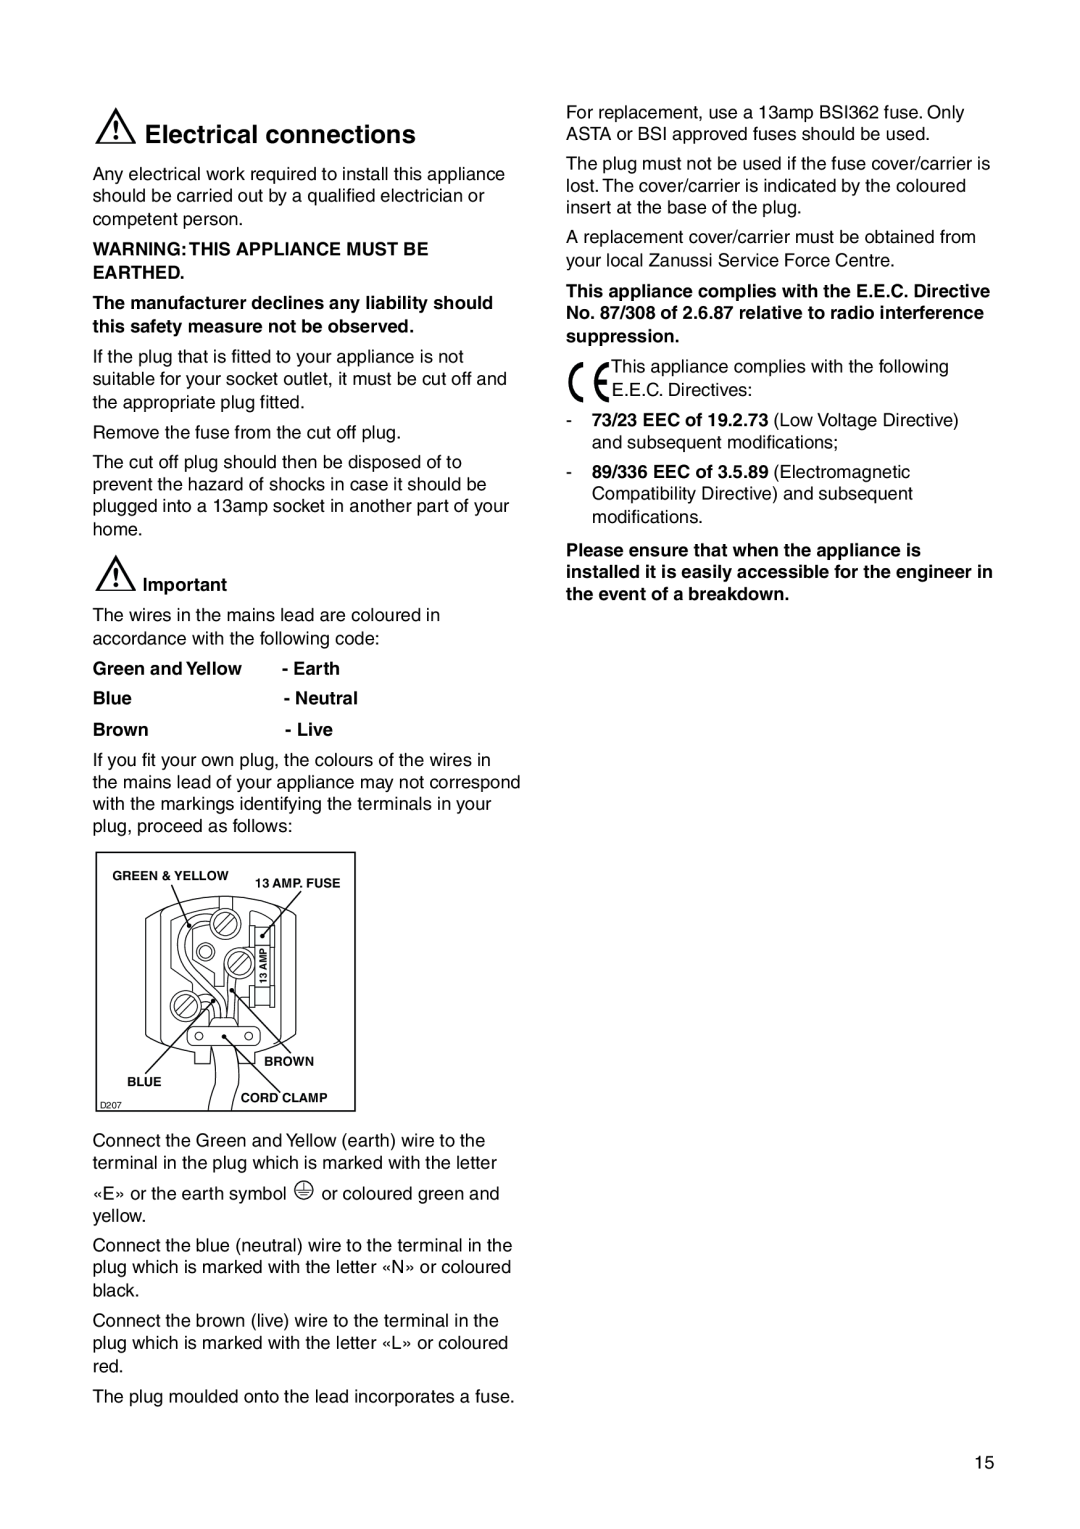 Zanussi ZI 918/8 KA manual Electrical connections, Warning This Appliance Must Be Earthed, Green and Yellow 